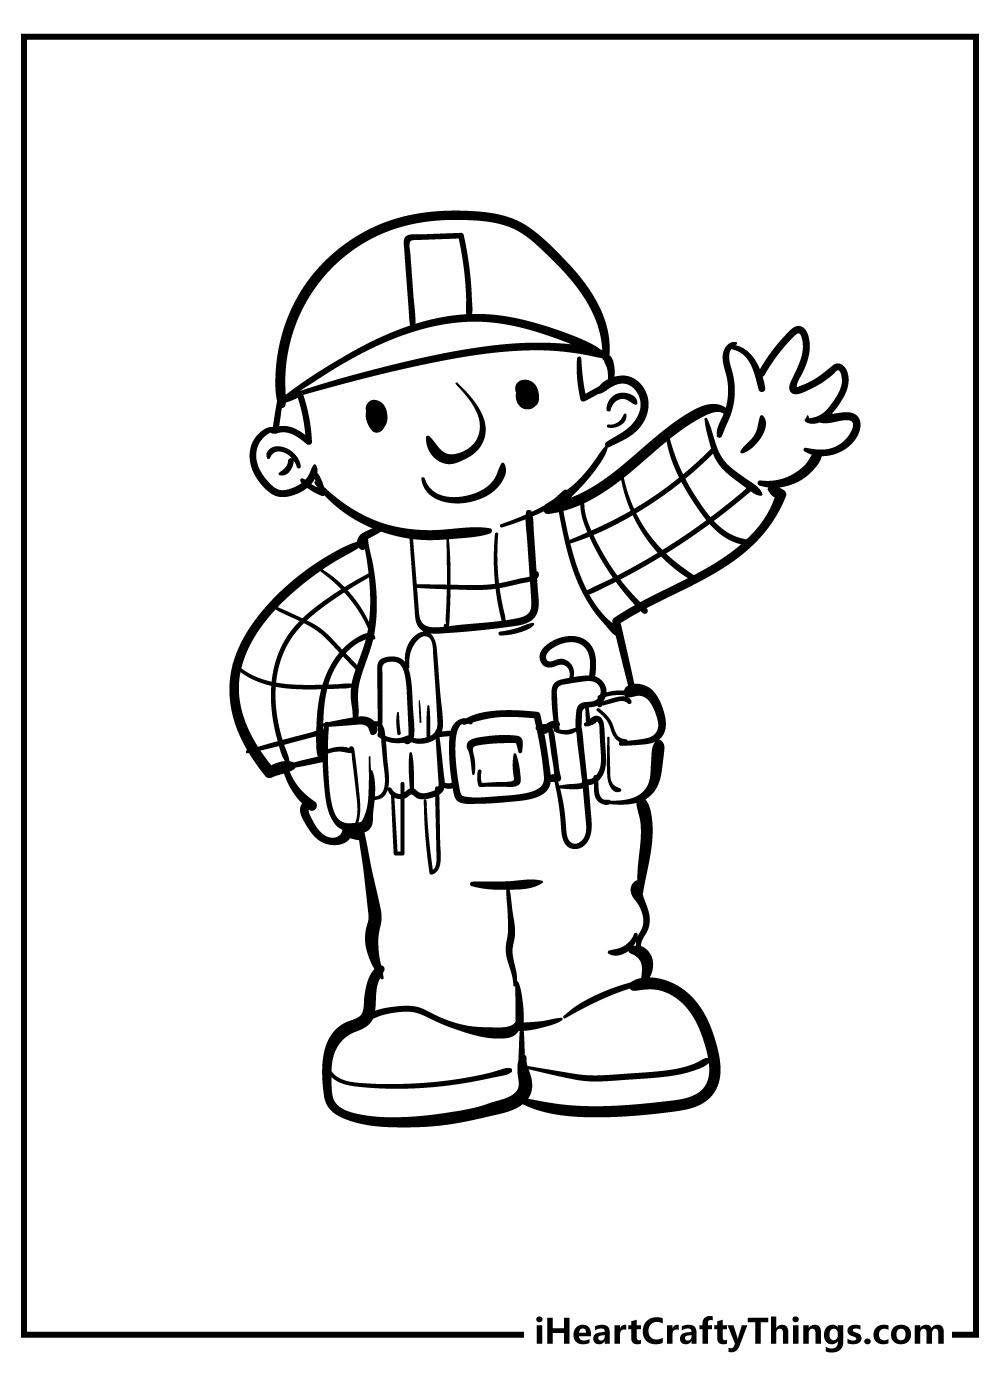 Bob the Builder Coloring Pages for kids free download